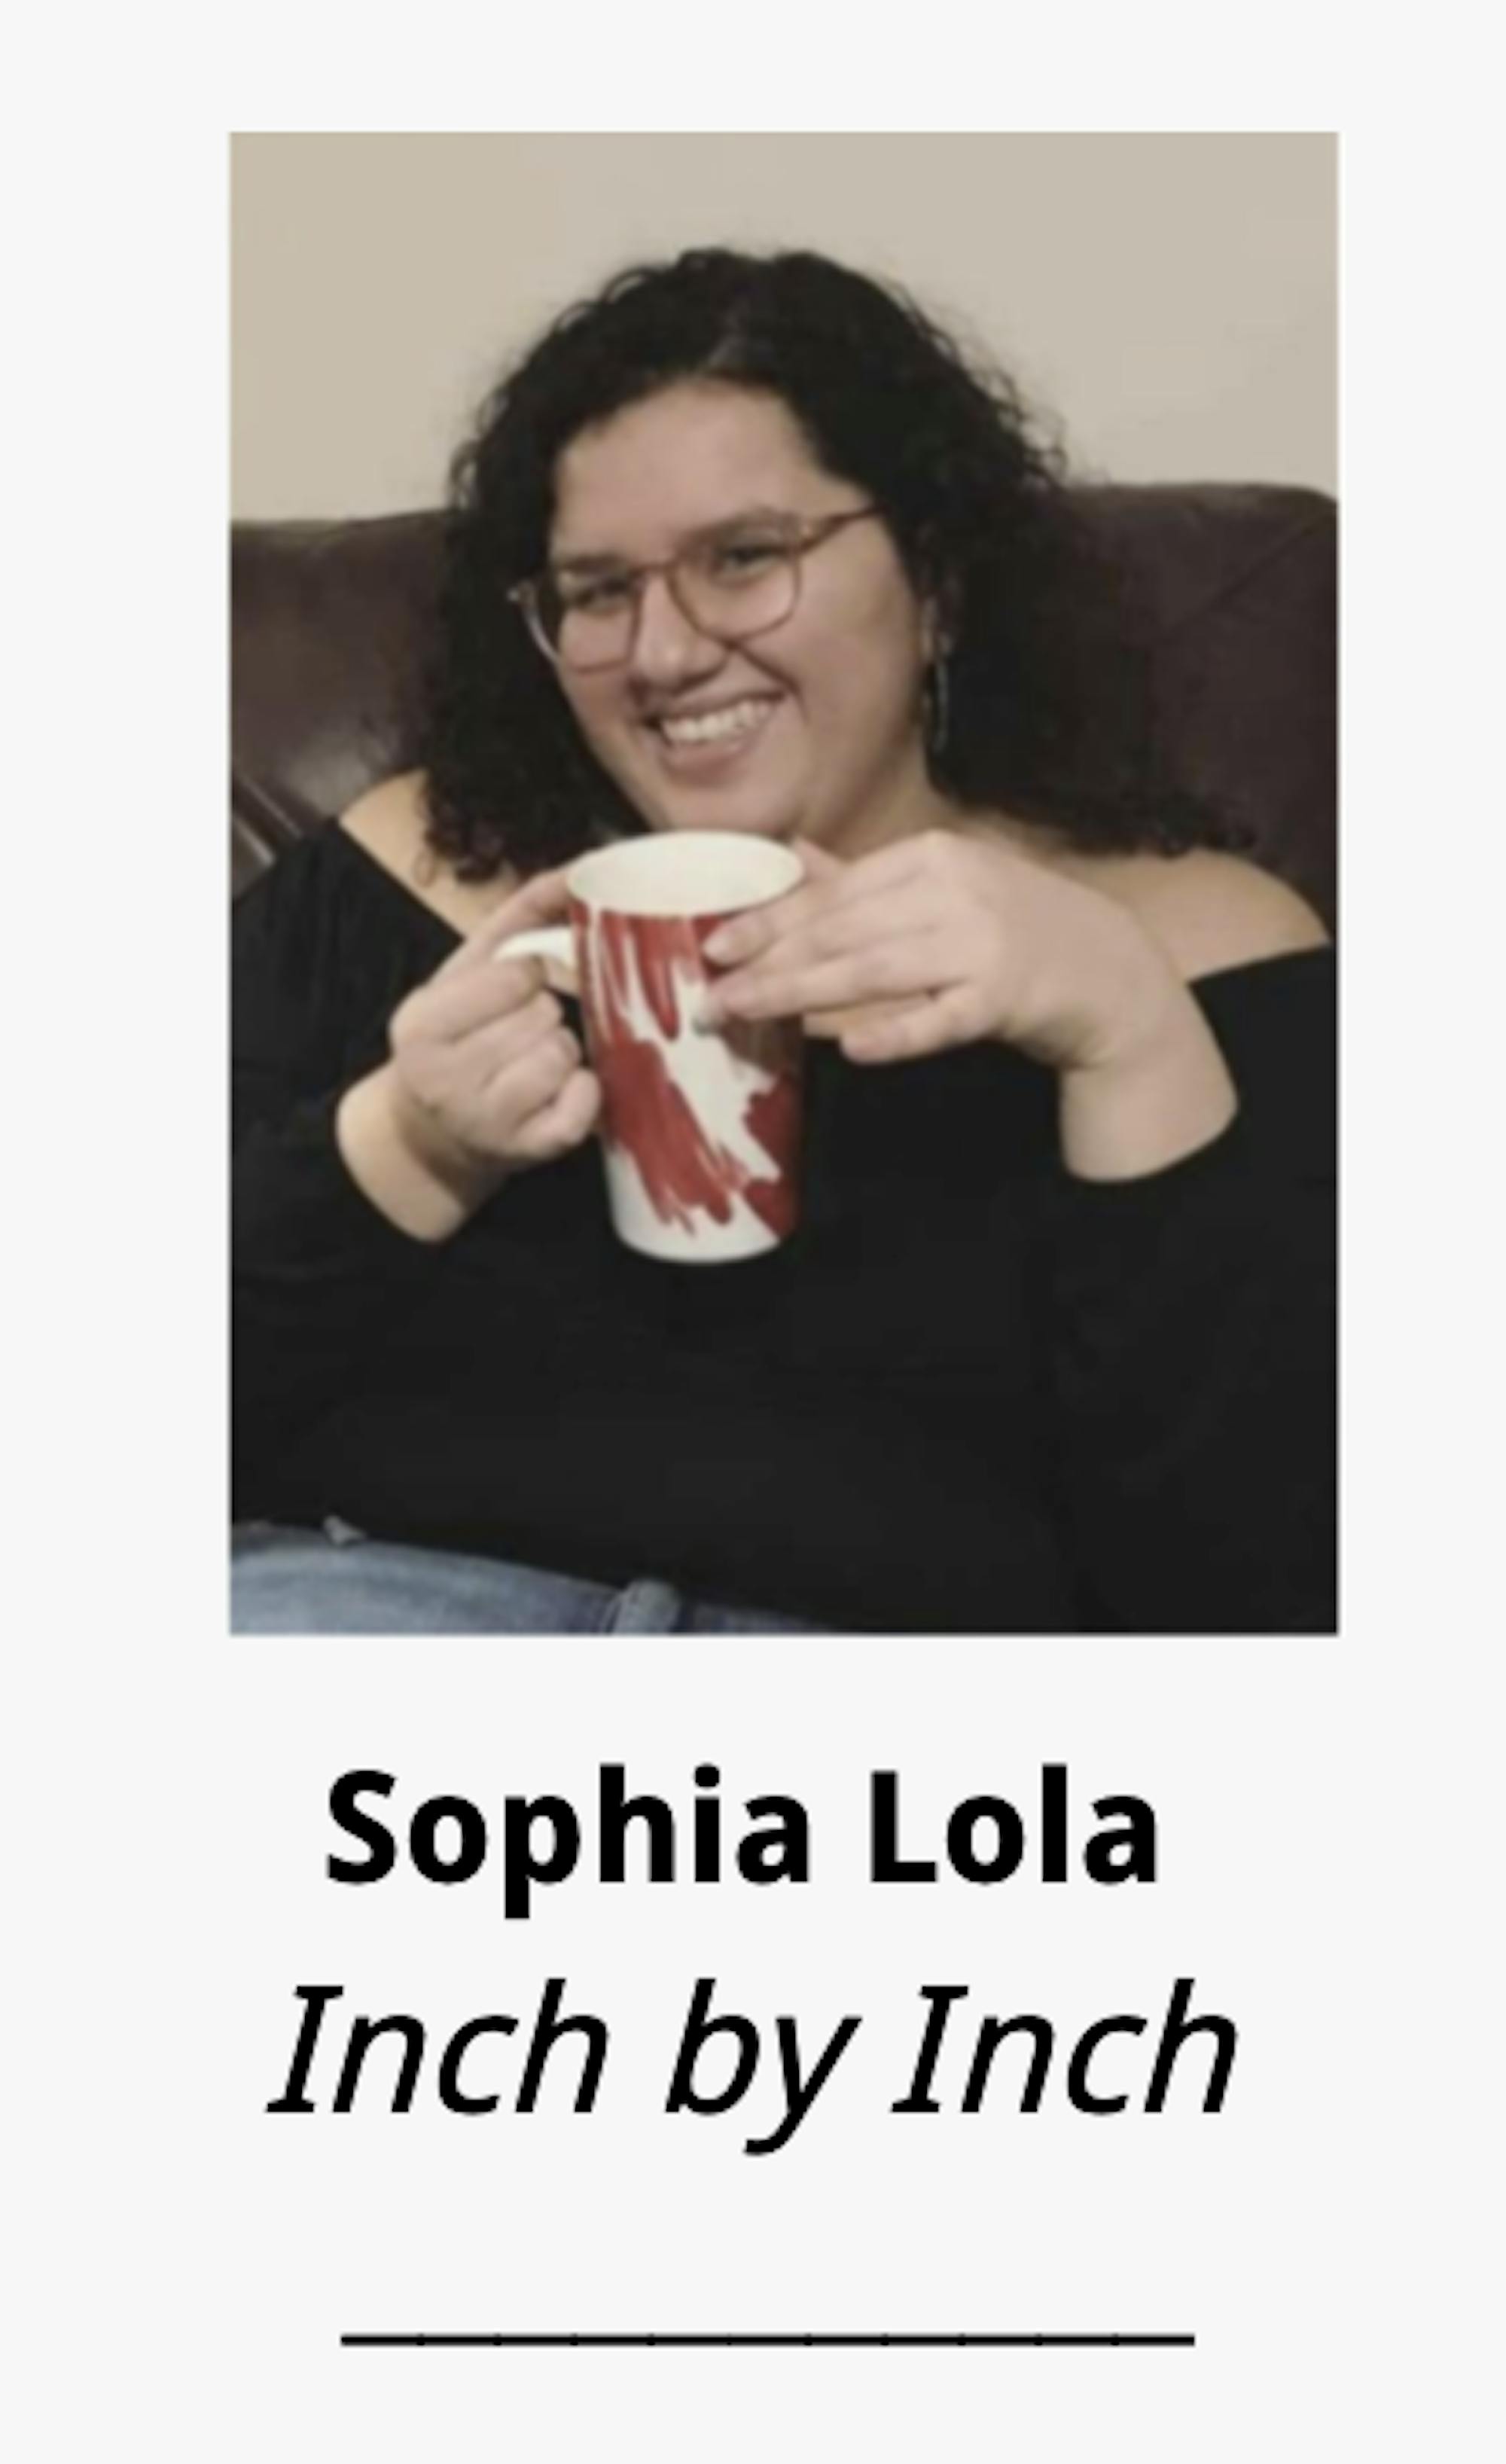 alex fasching recommends sophia lola pic